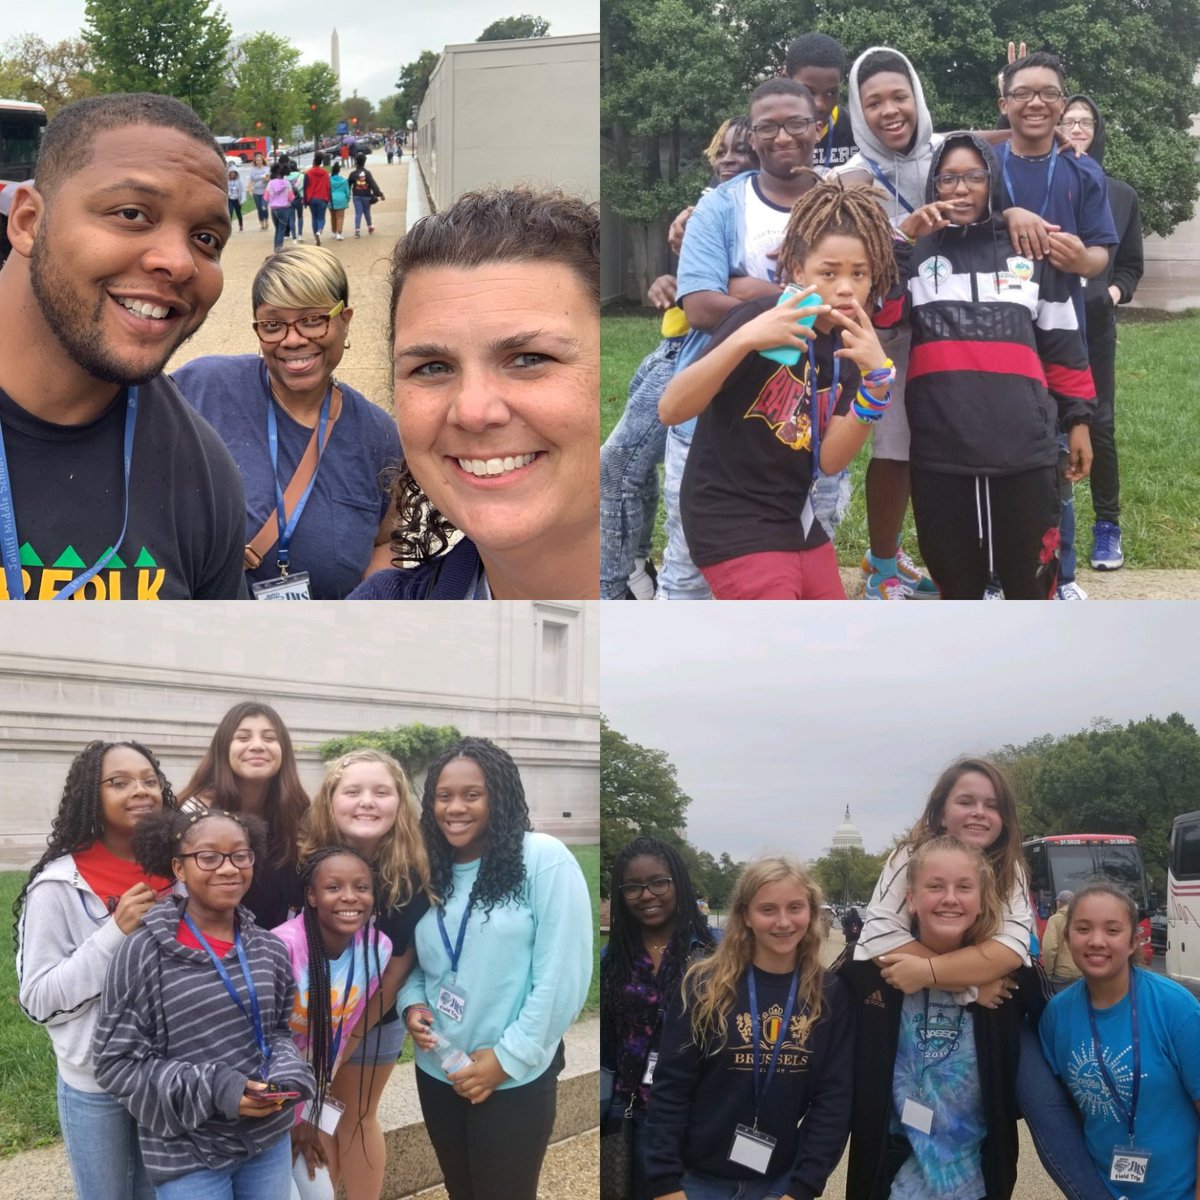 Our 8th graders are having a blast in D.C. #jamminginDC #historyisfun #handsonlearning